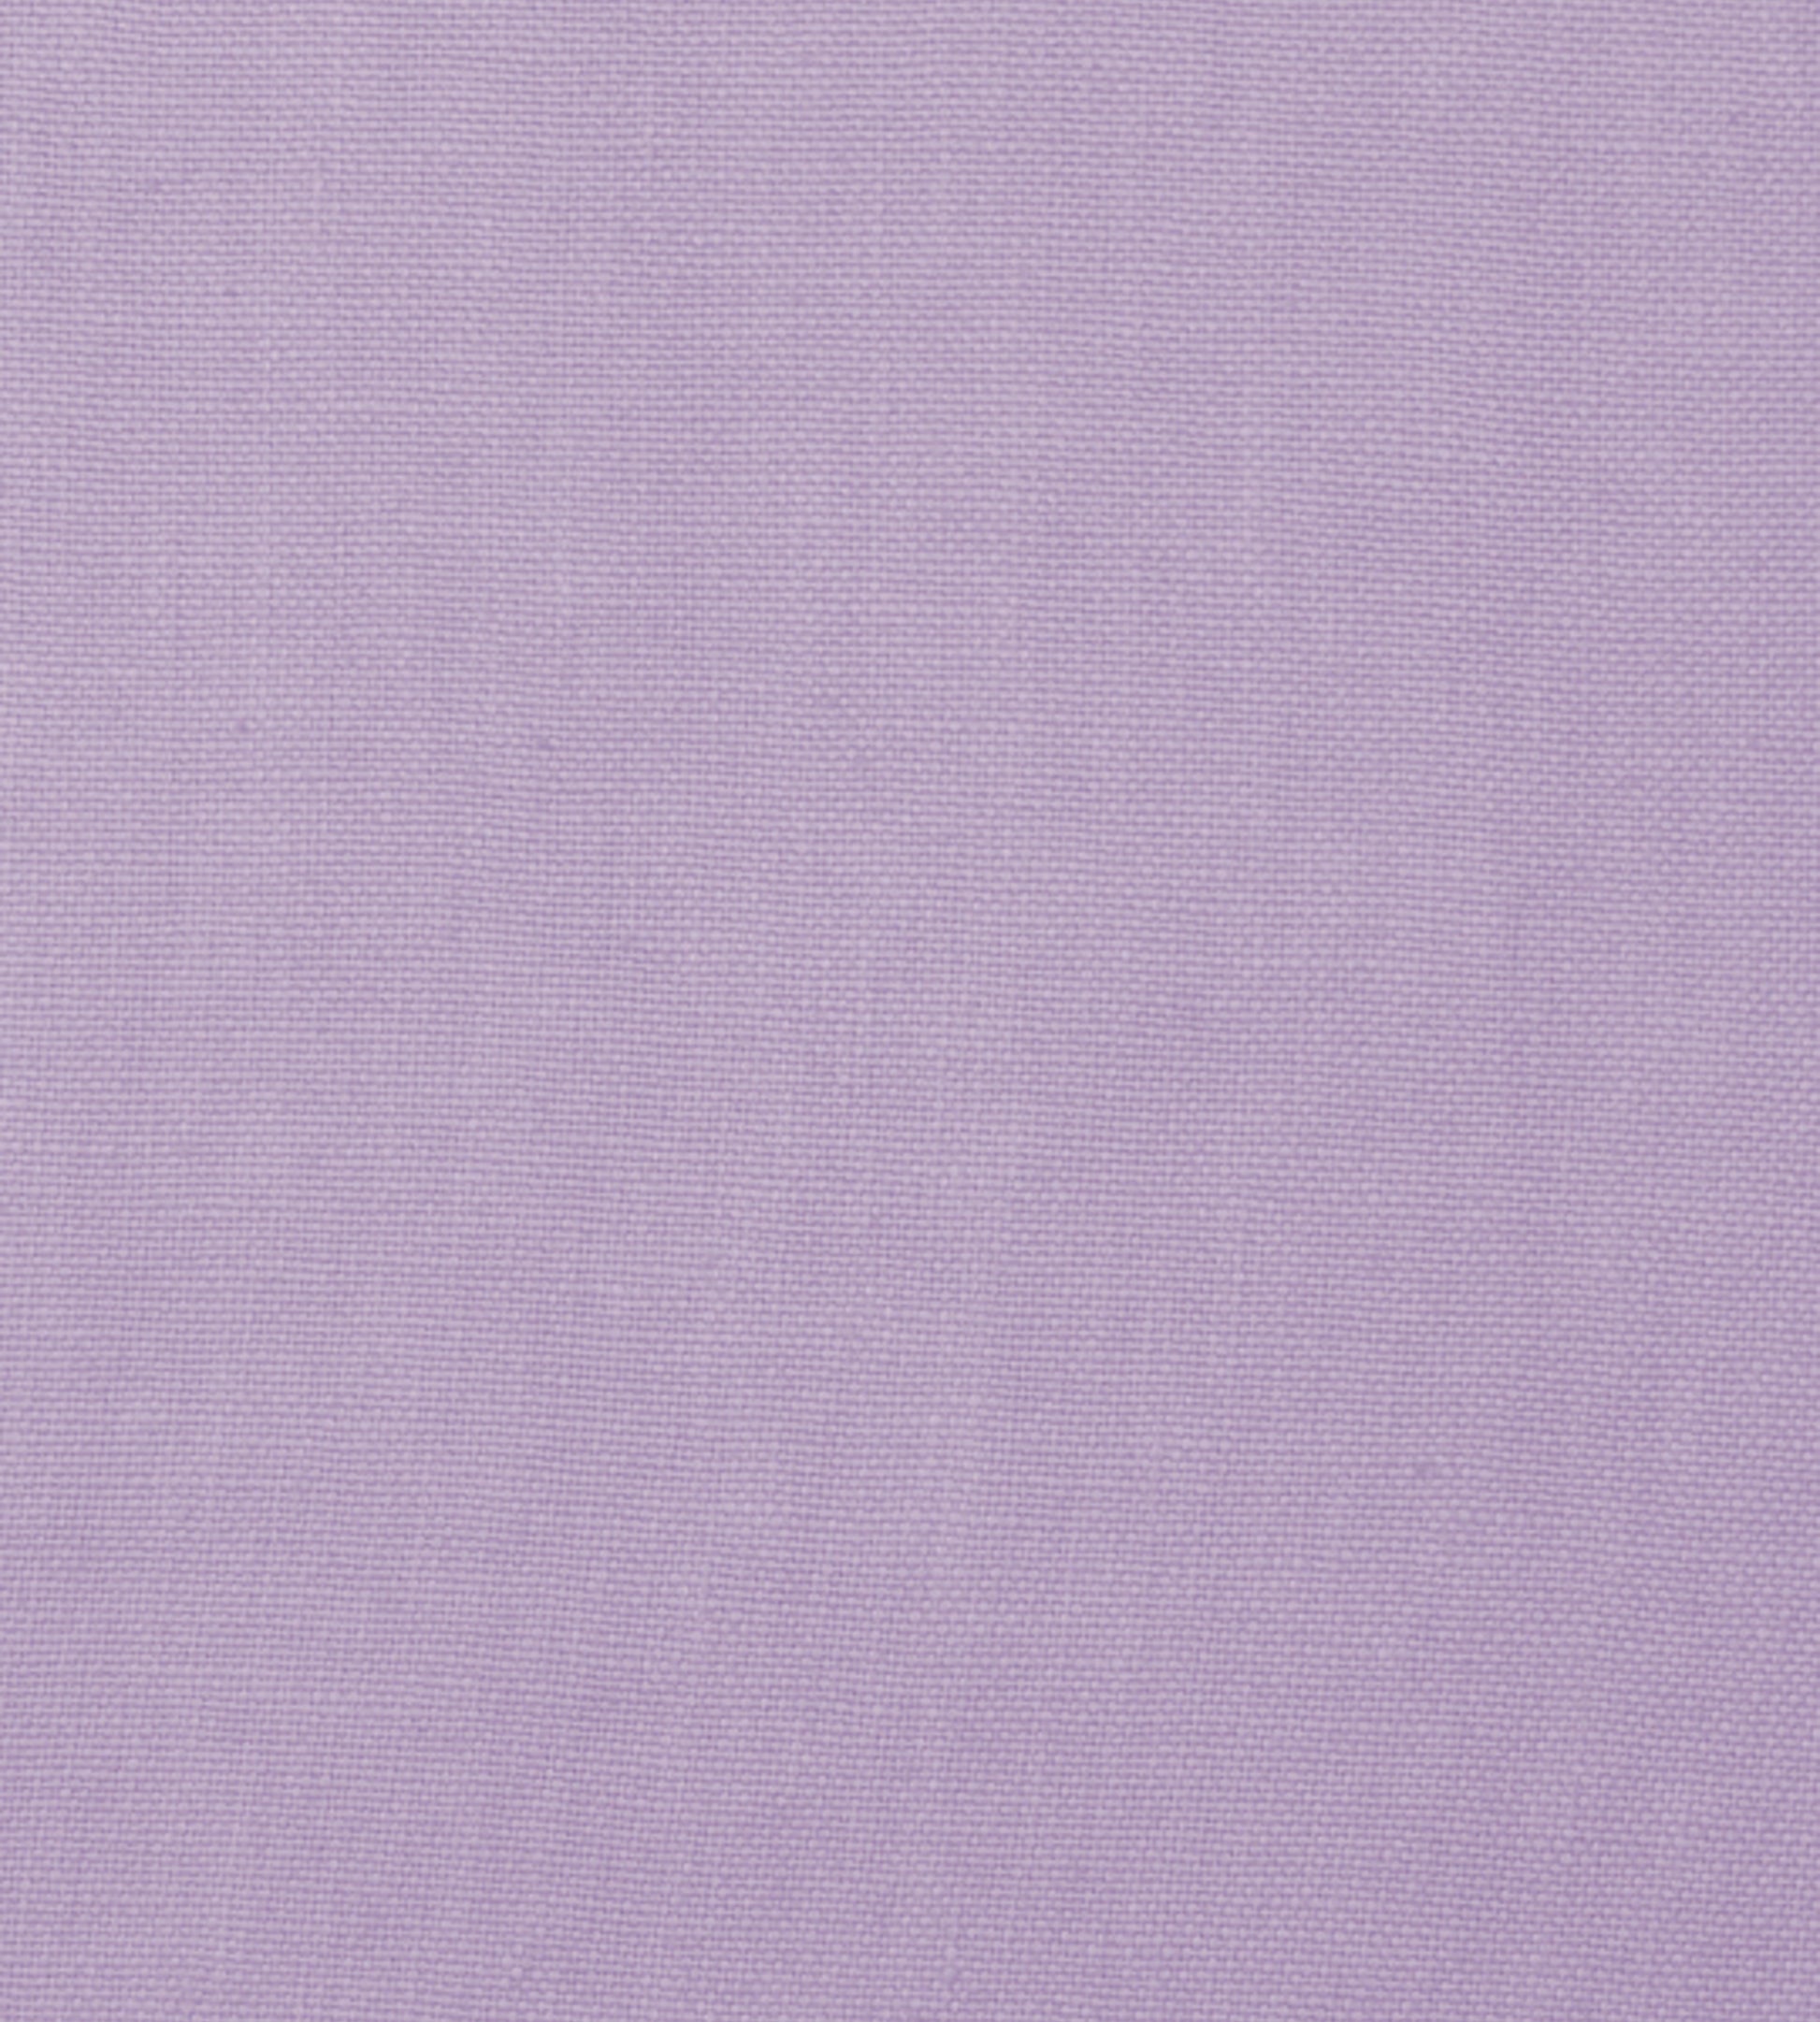 Purchase Scalamandre Fabric Product SC 001827108, Toscana Linen Lavender 1